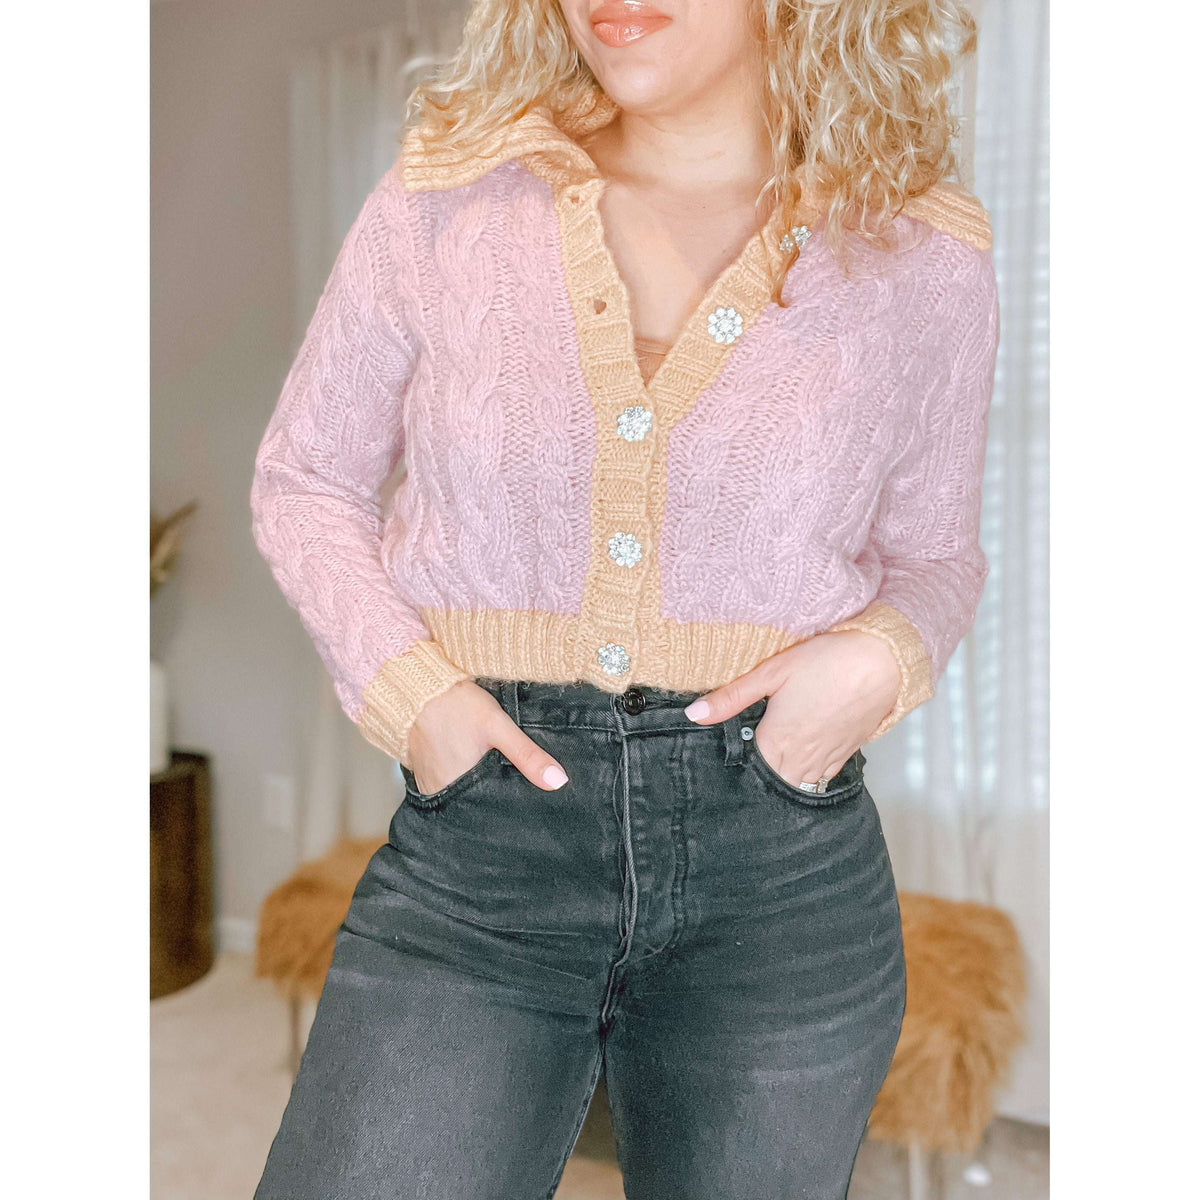 Rose Cable Knit Cardigan - The Hive by Chris Jesselle